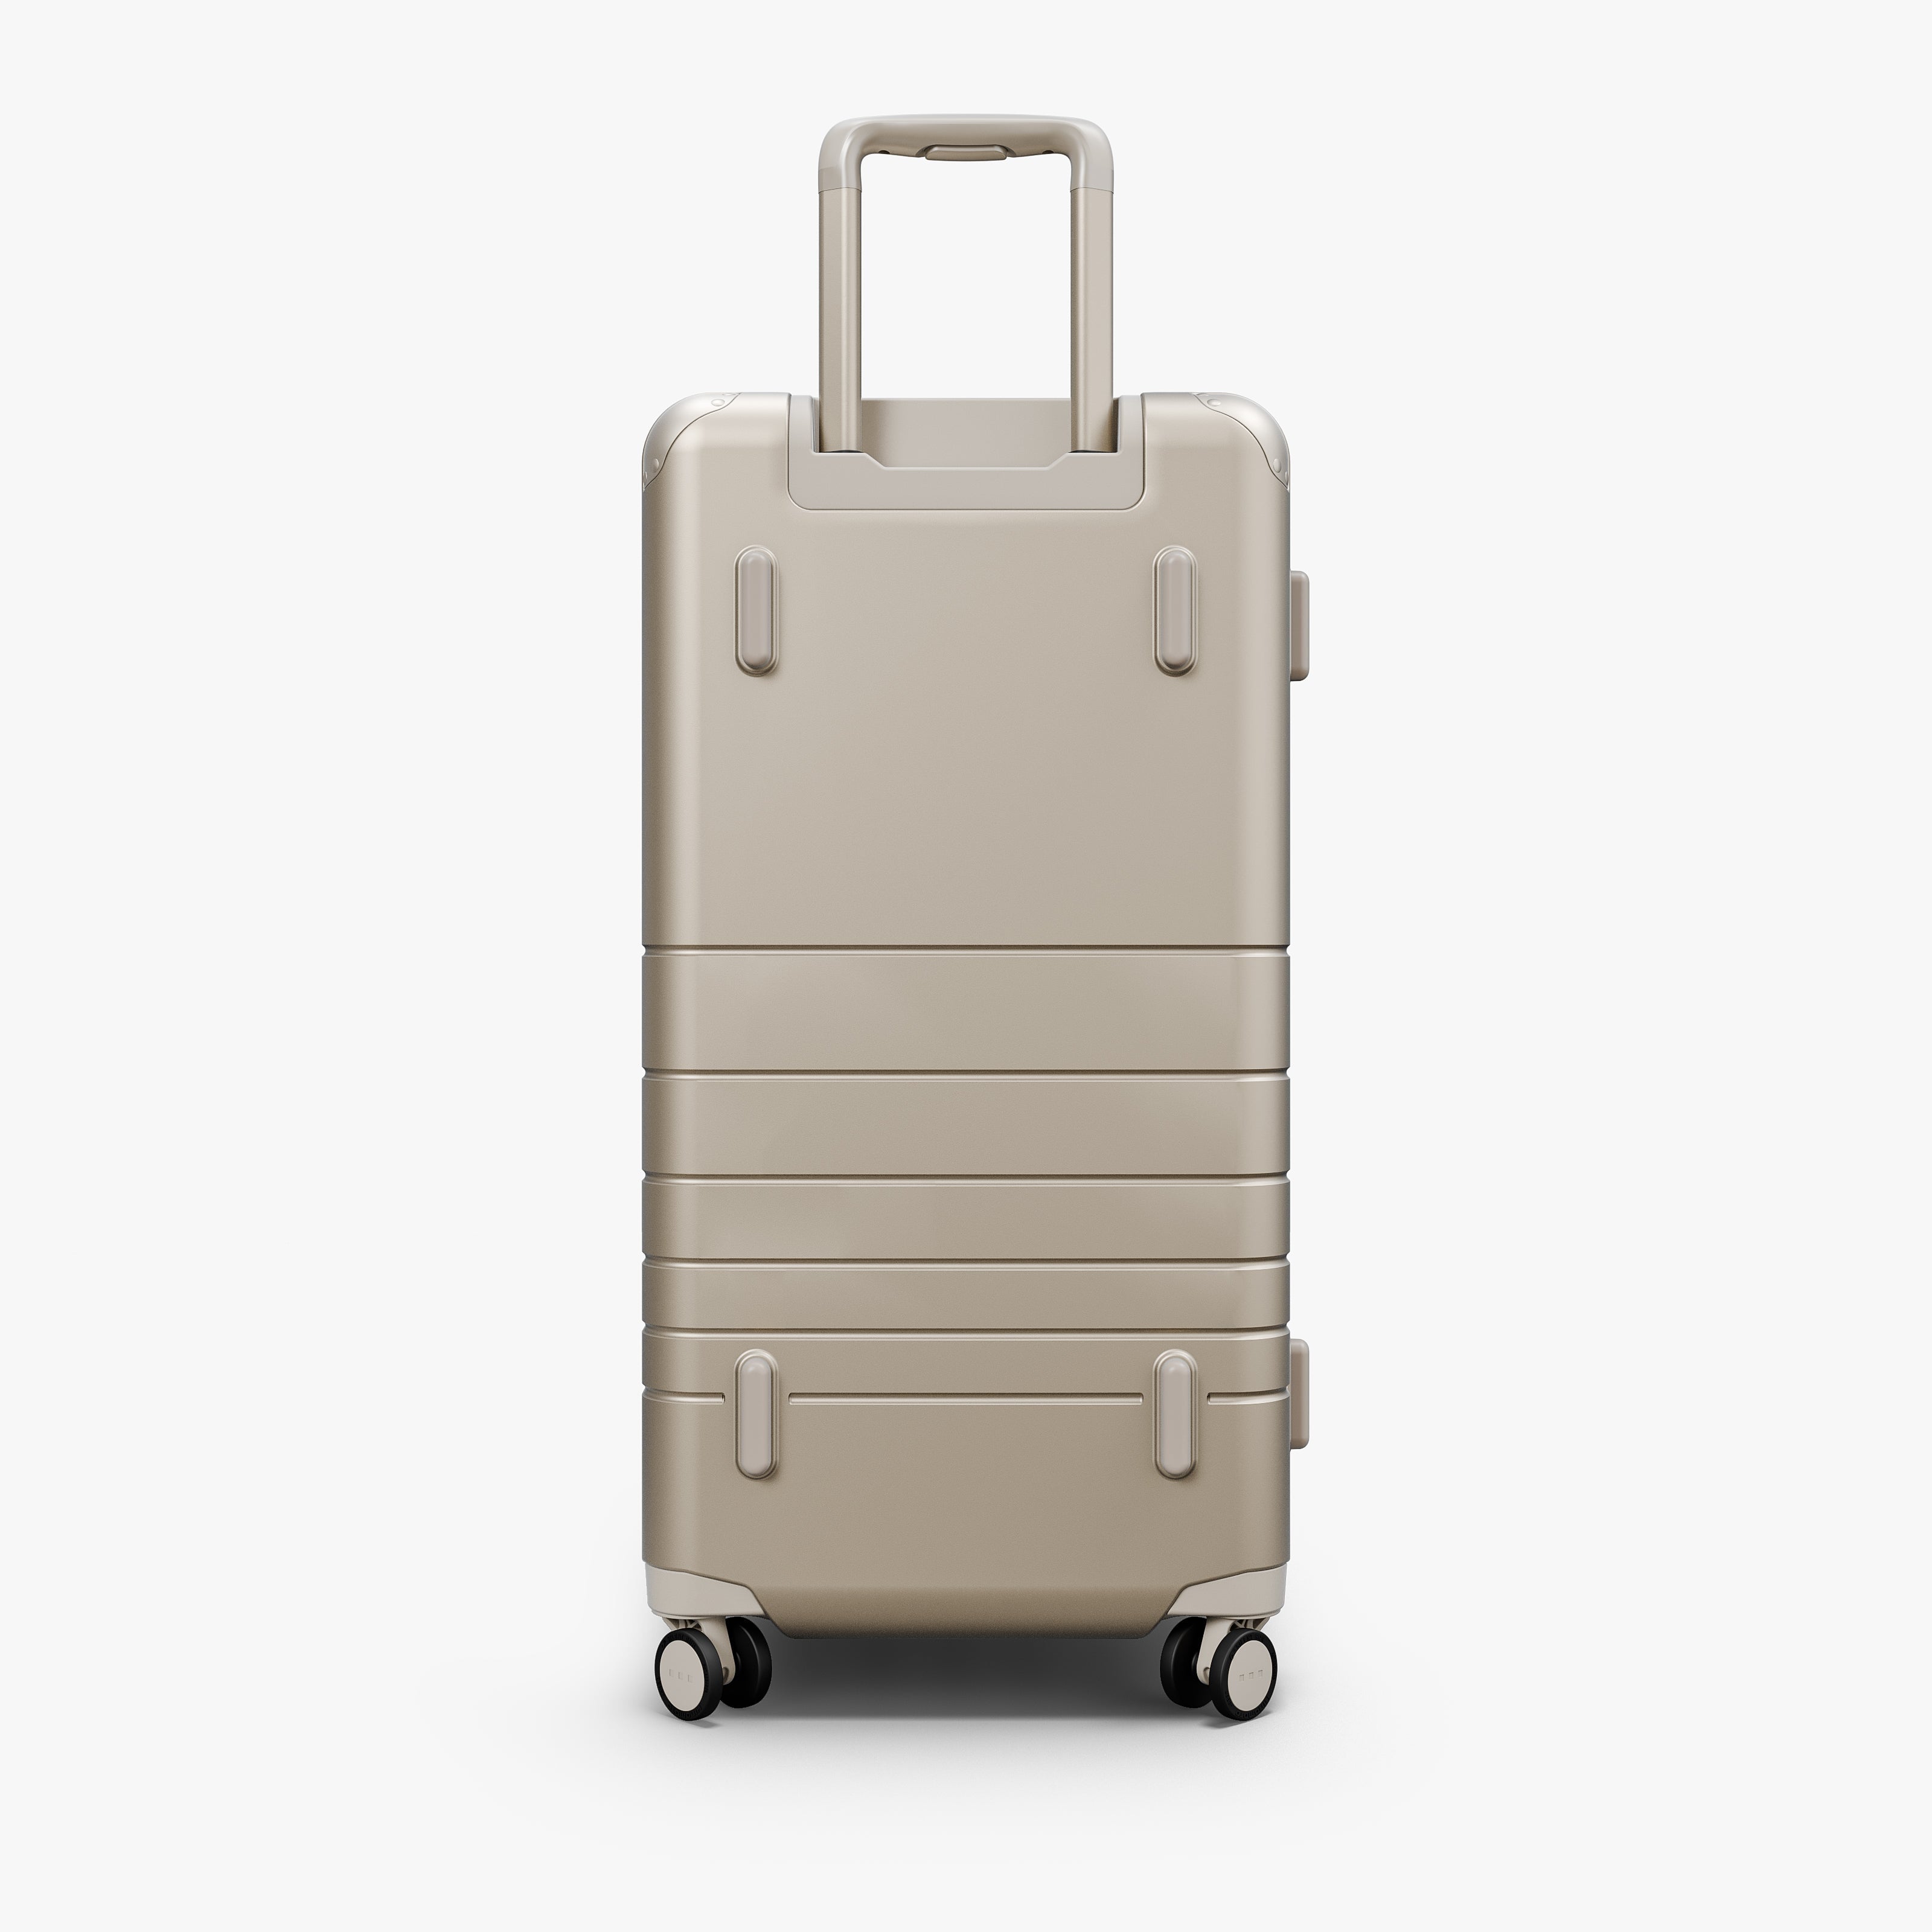 Hybrid Trunk Check-In Luggage